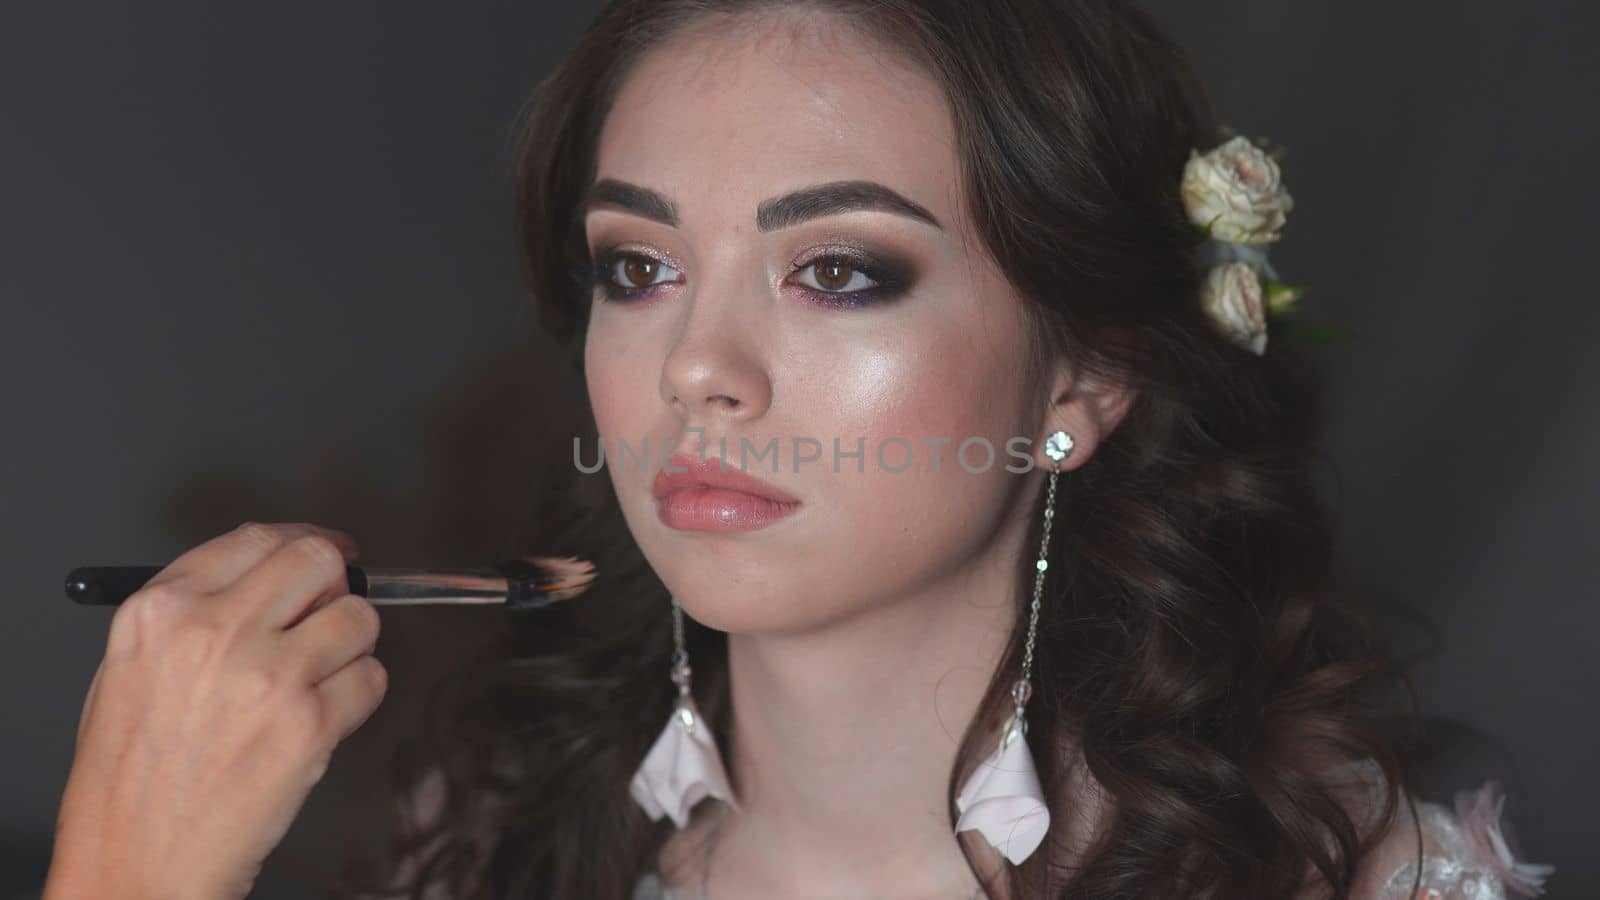 Girl make-up artist applies powder on the face of the model